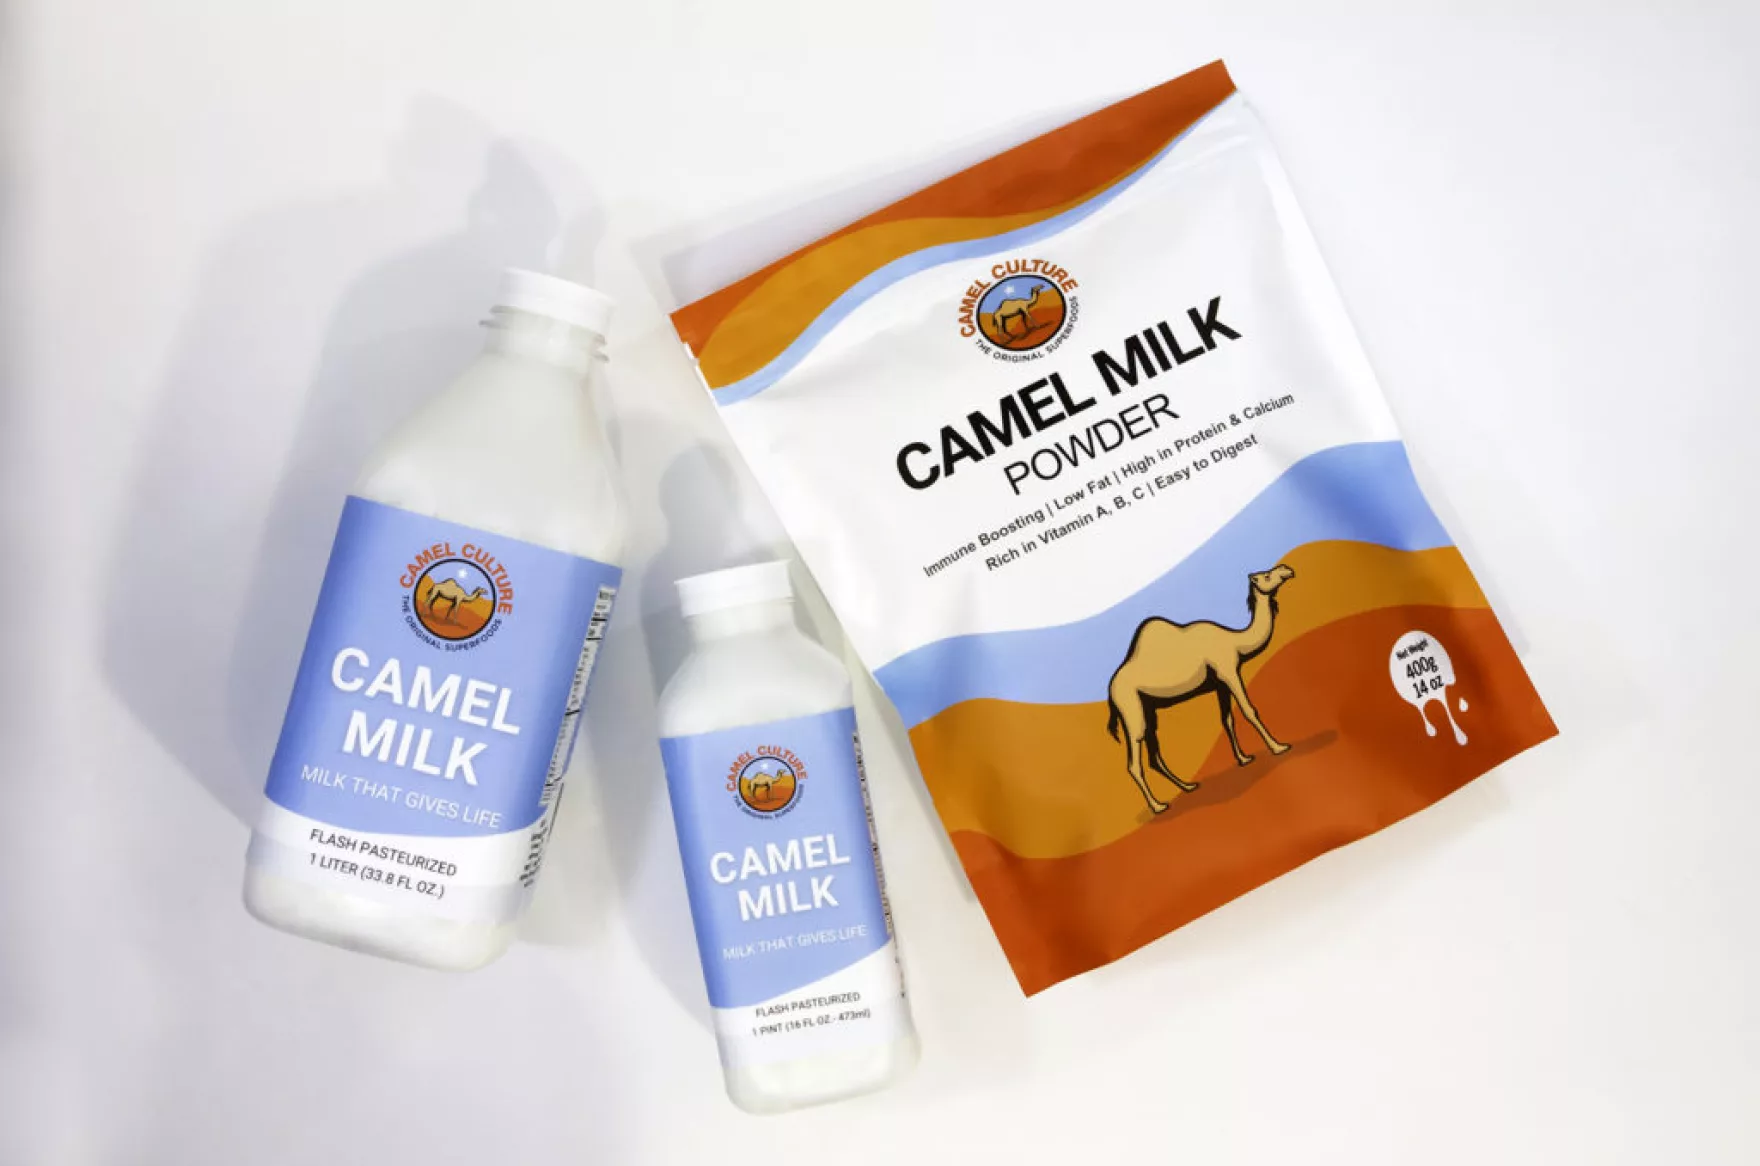 Camel milk from one Missouri farm is making its way to kitchens across the country1